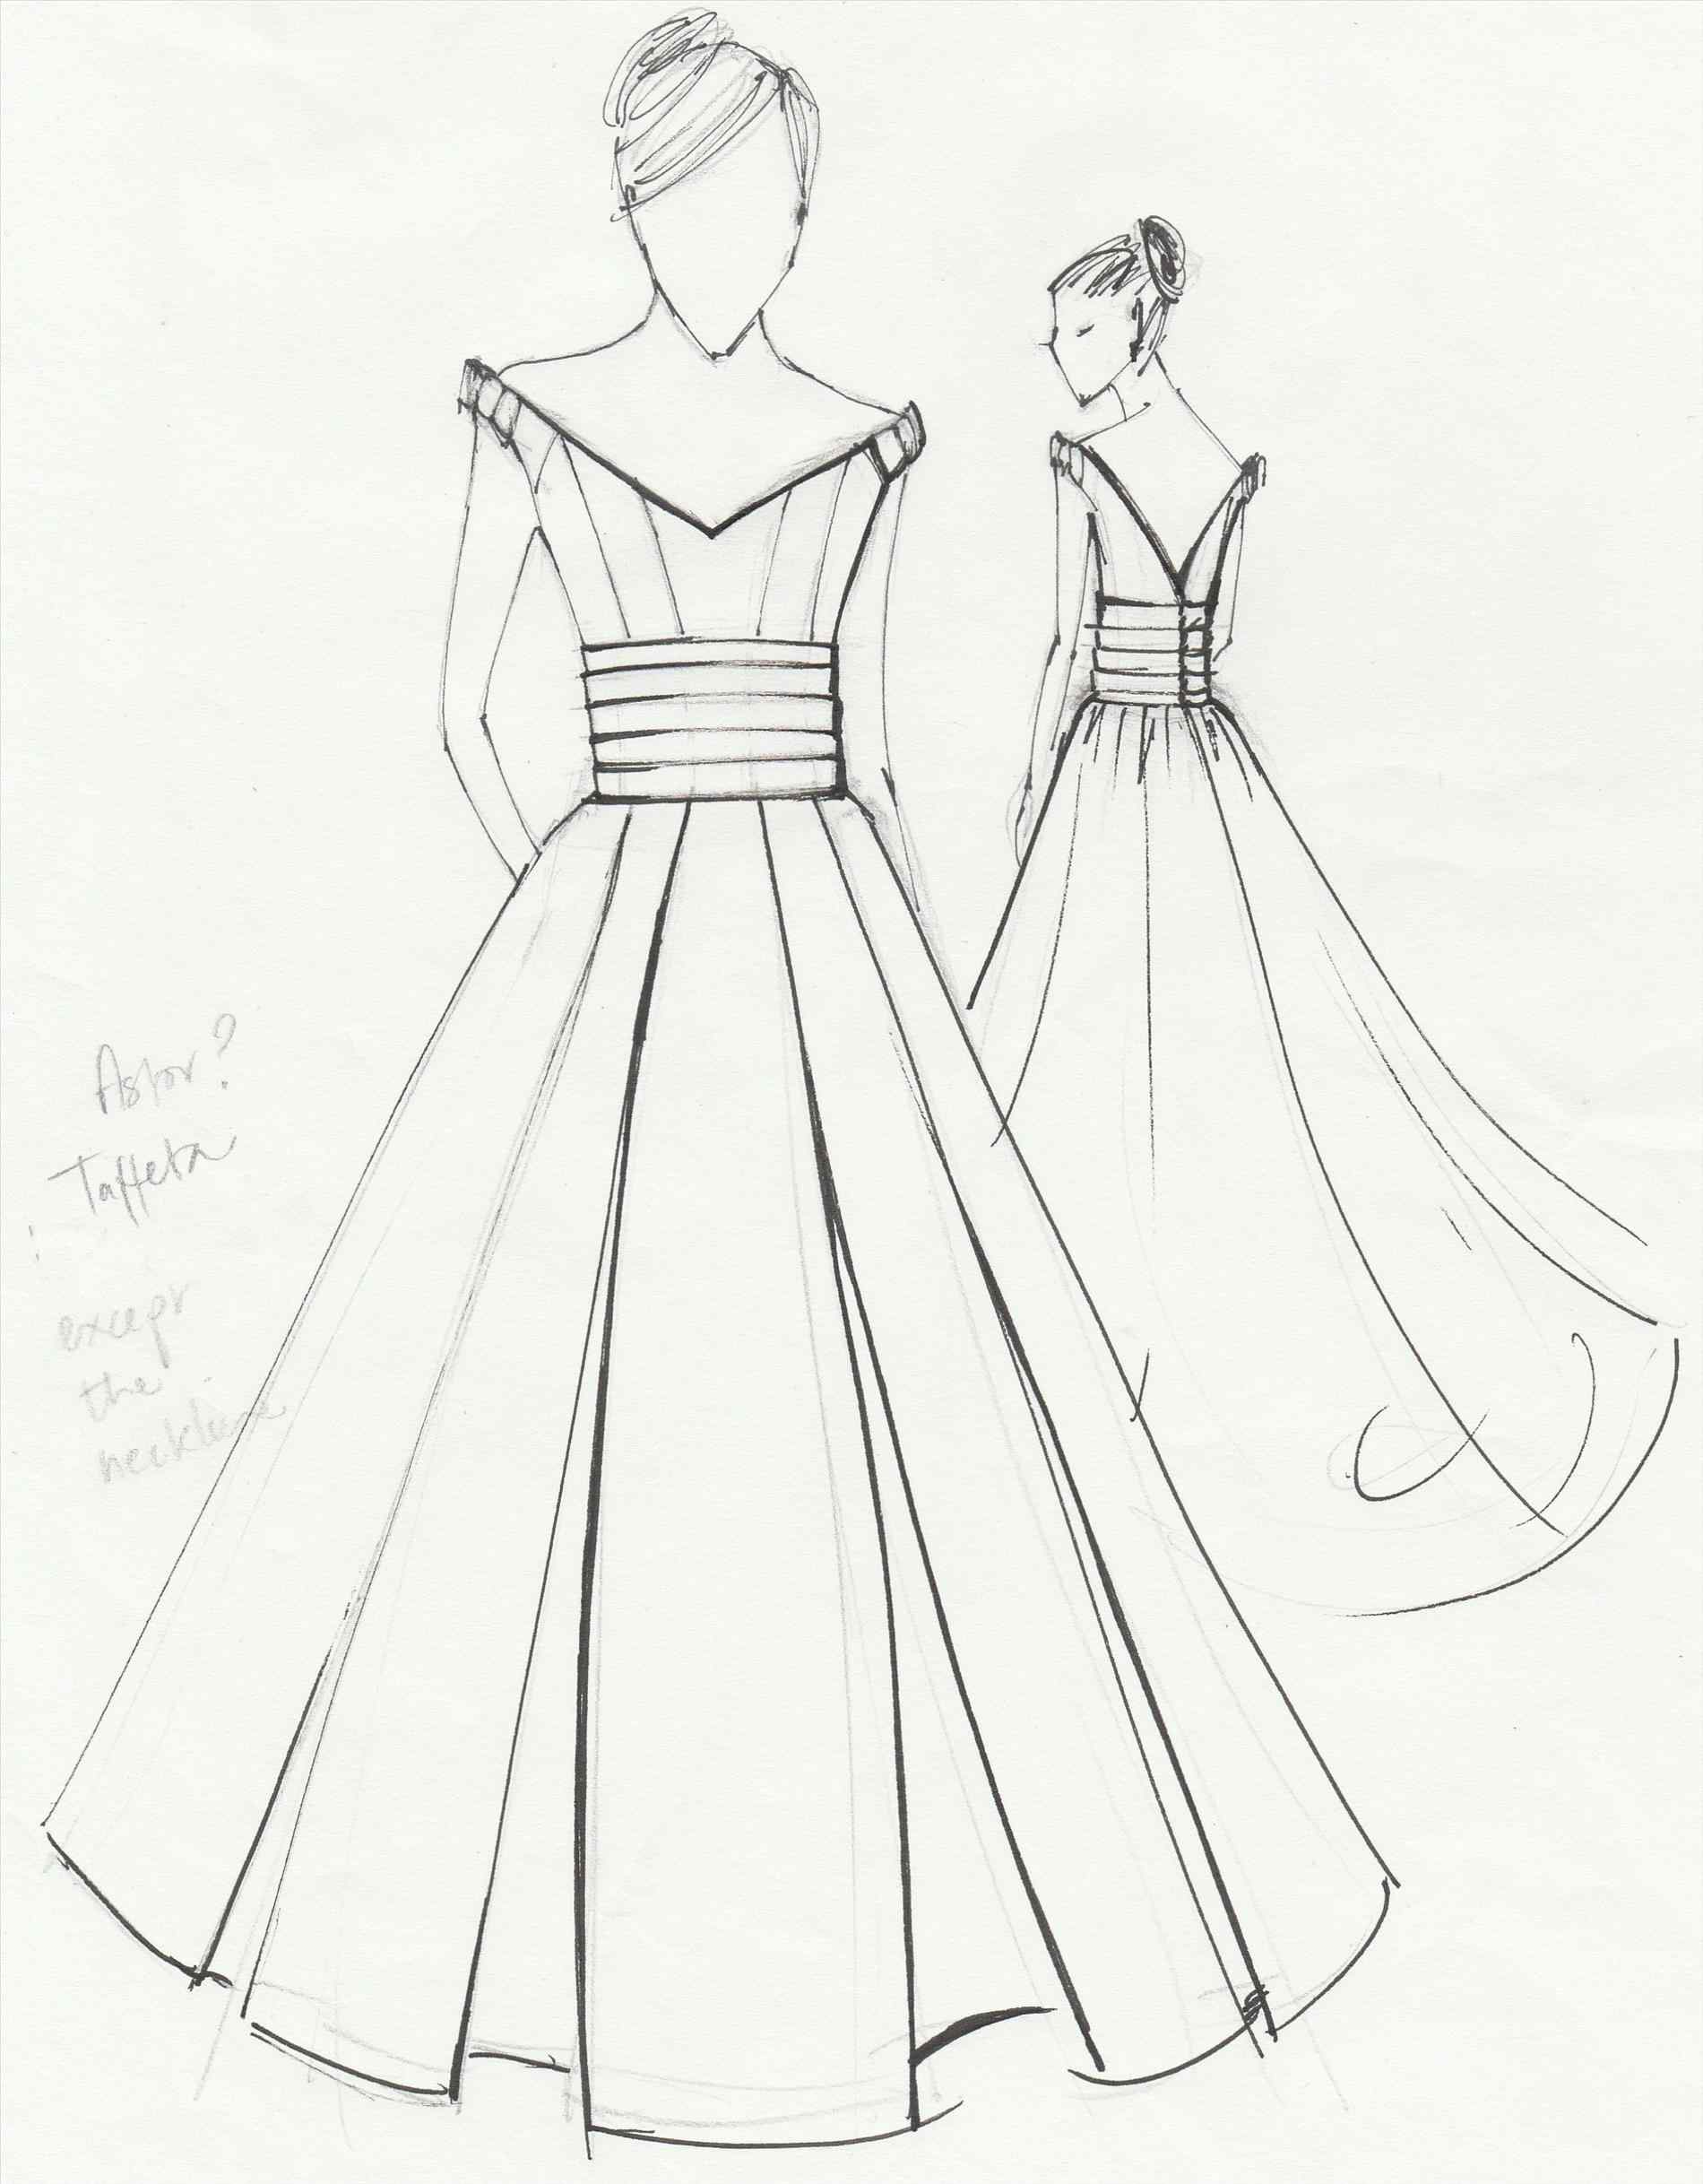 Newest For Fashion Sketches Simple Dress Design Drawing | Art Gallery